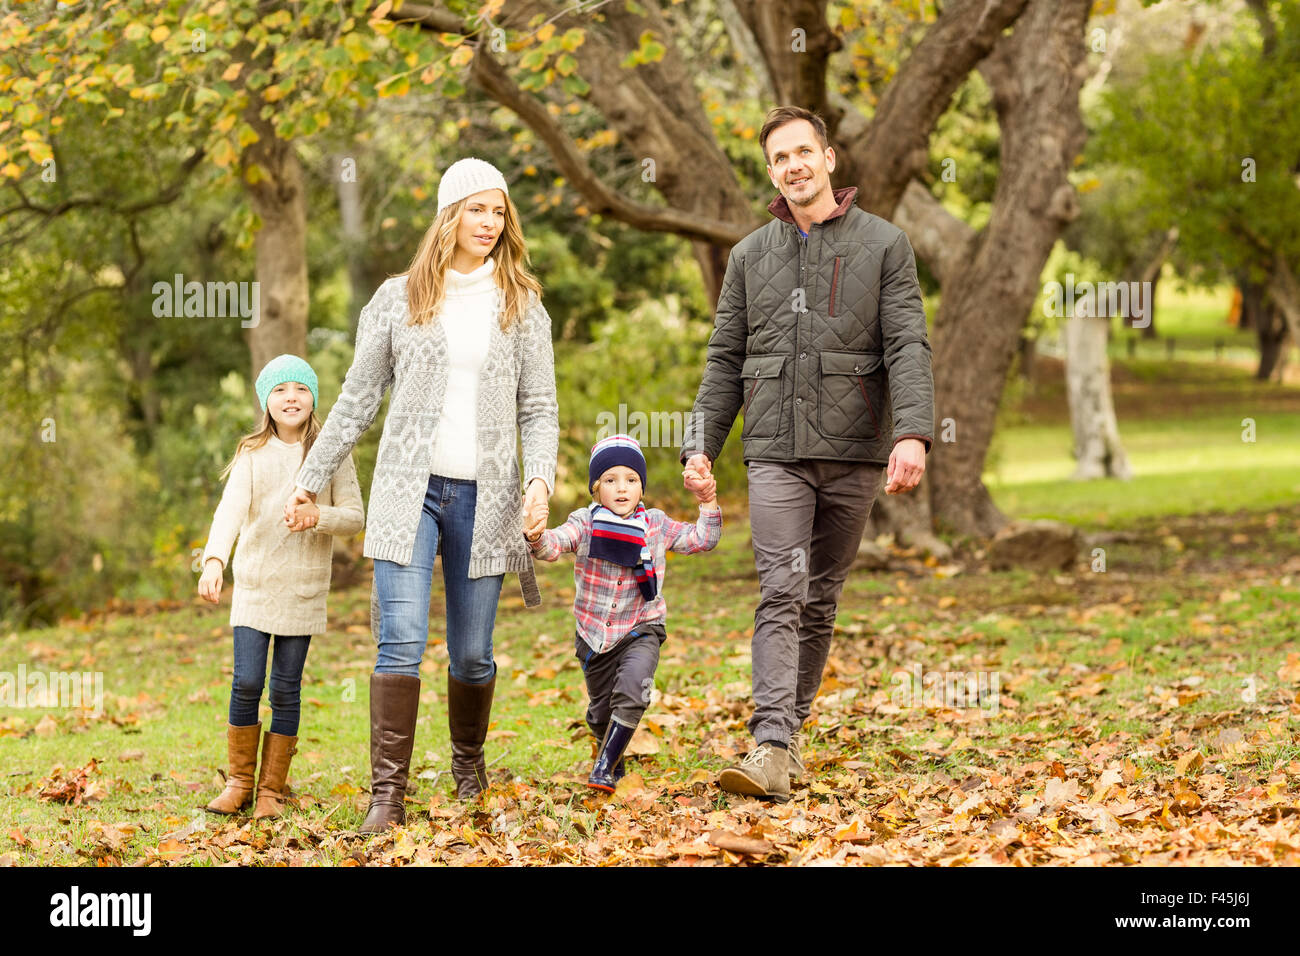 Young family running in leaves Stock Photo